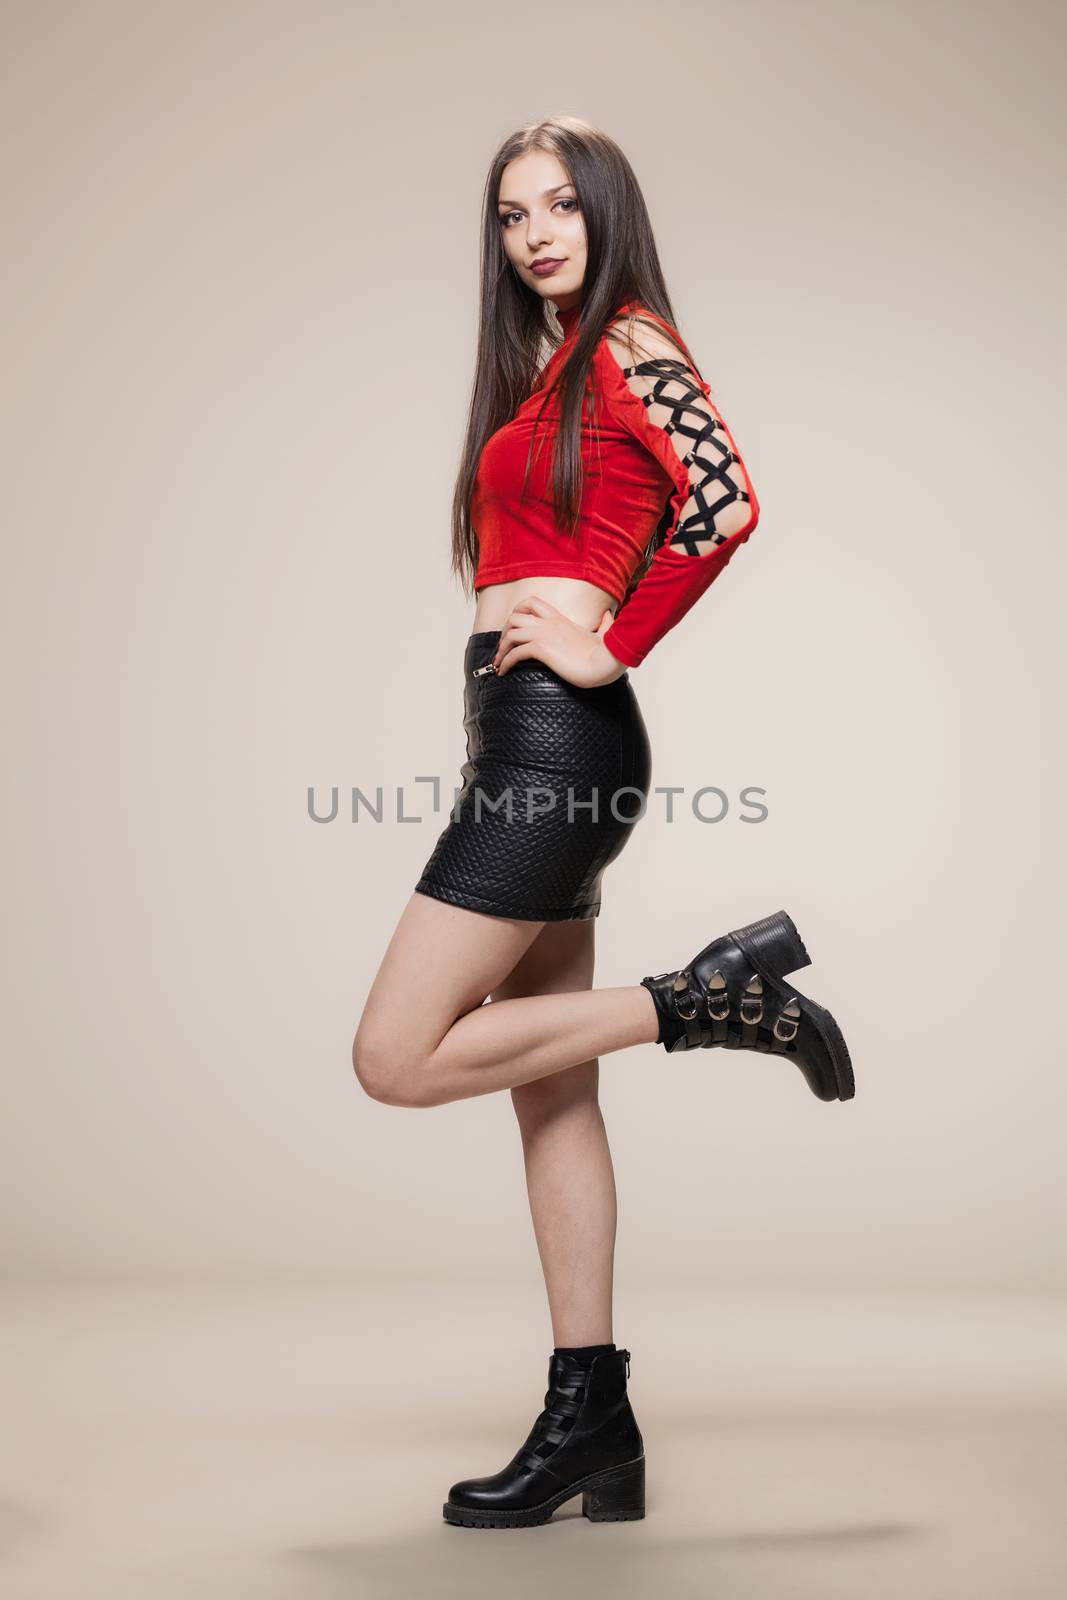 gothic style girl in red shirt, short black dress and boots